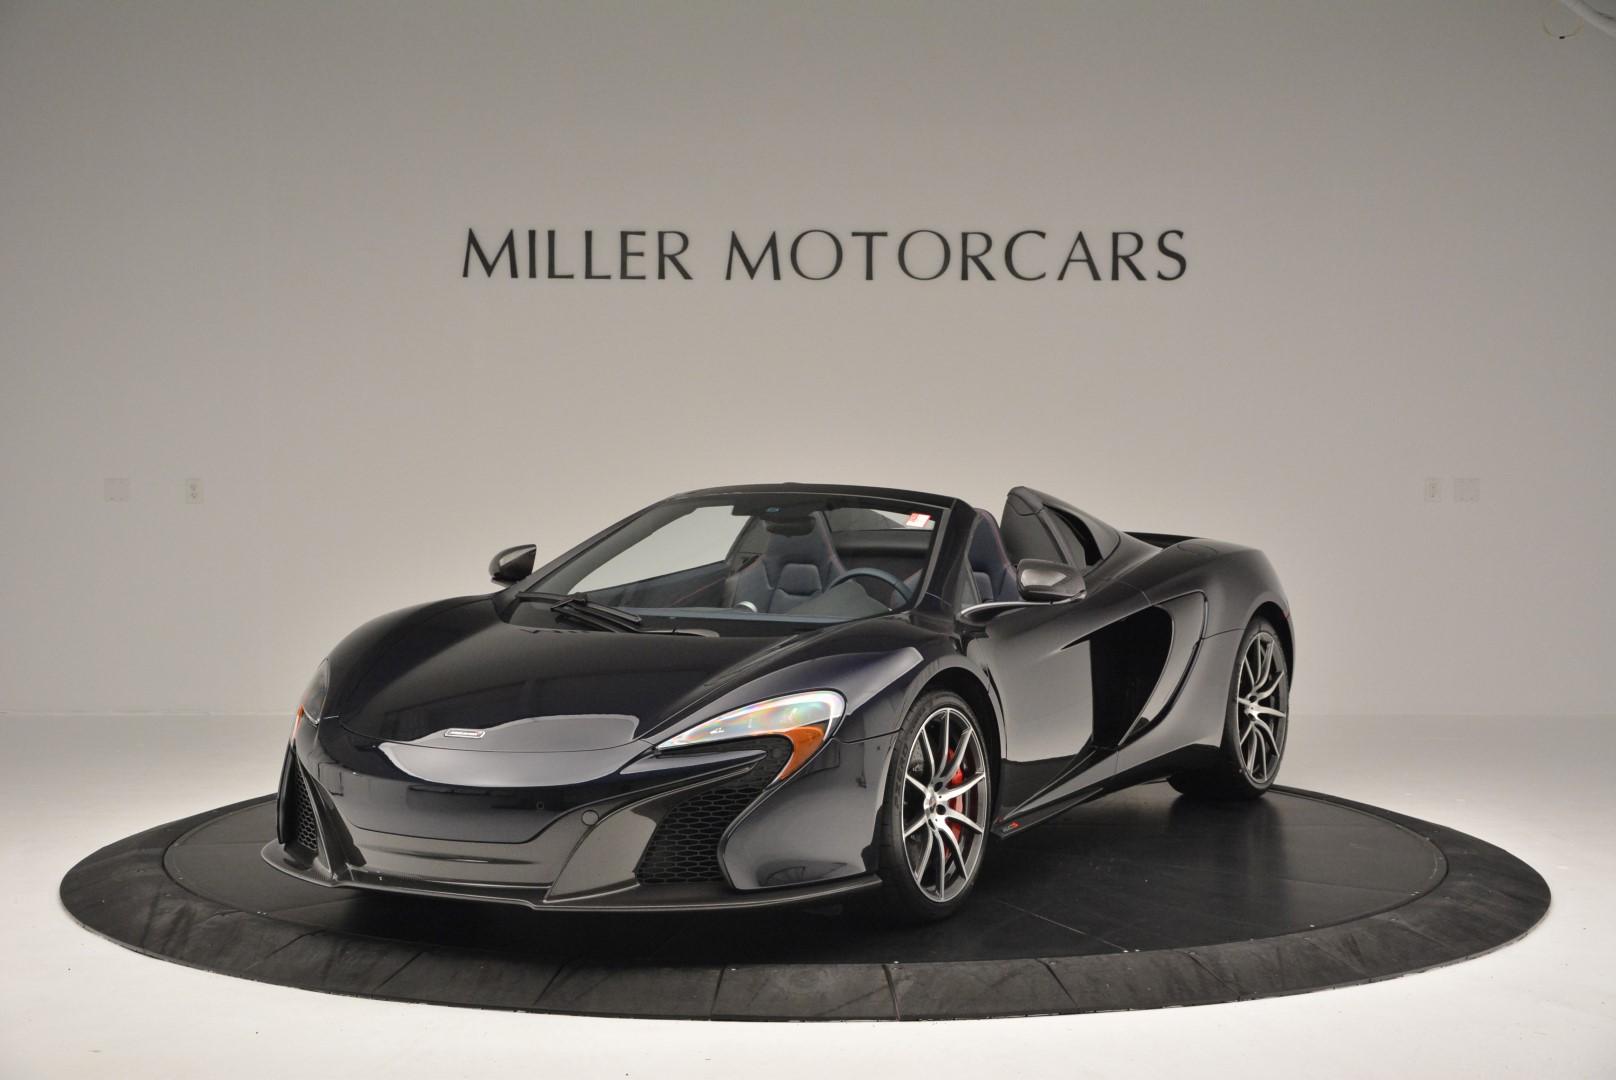 Used 2016 McLaren 650S Spider for sale Sold at Alfa Romeo of Greenwich in Greenwich CT 06830 1